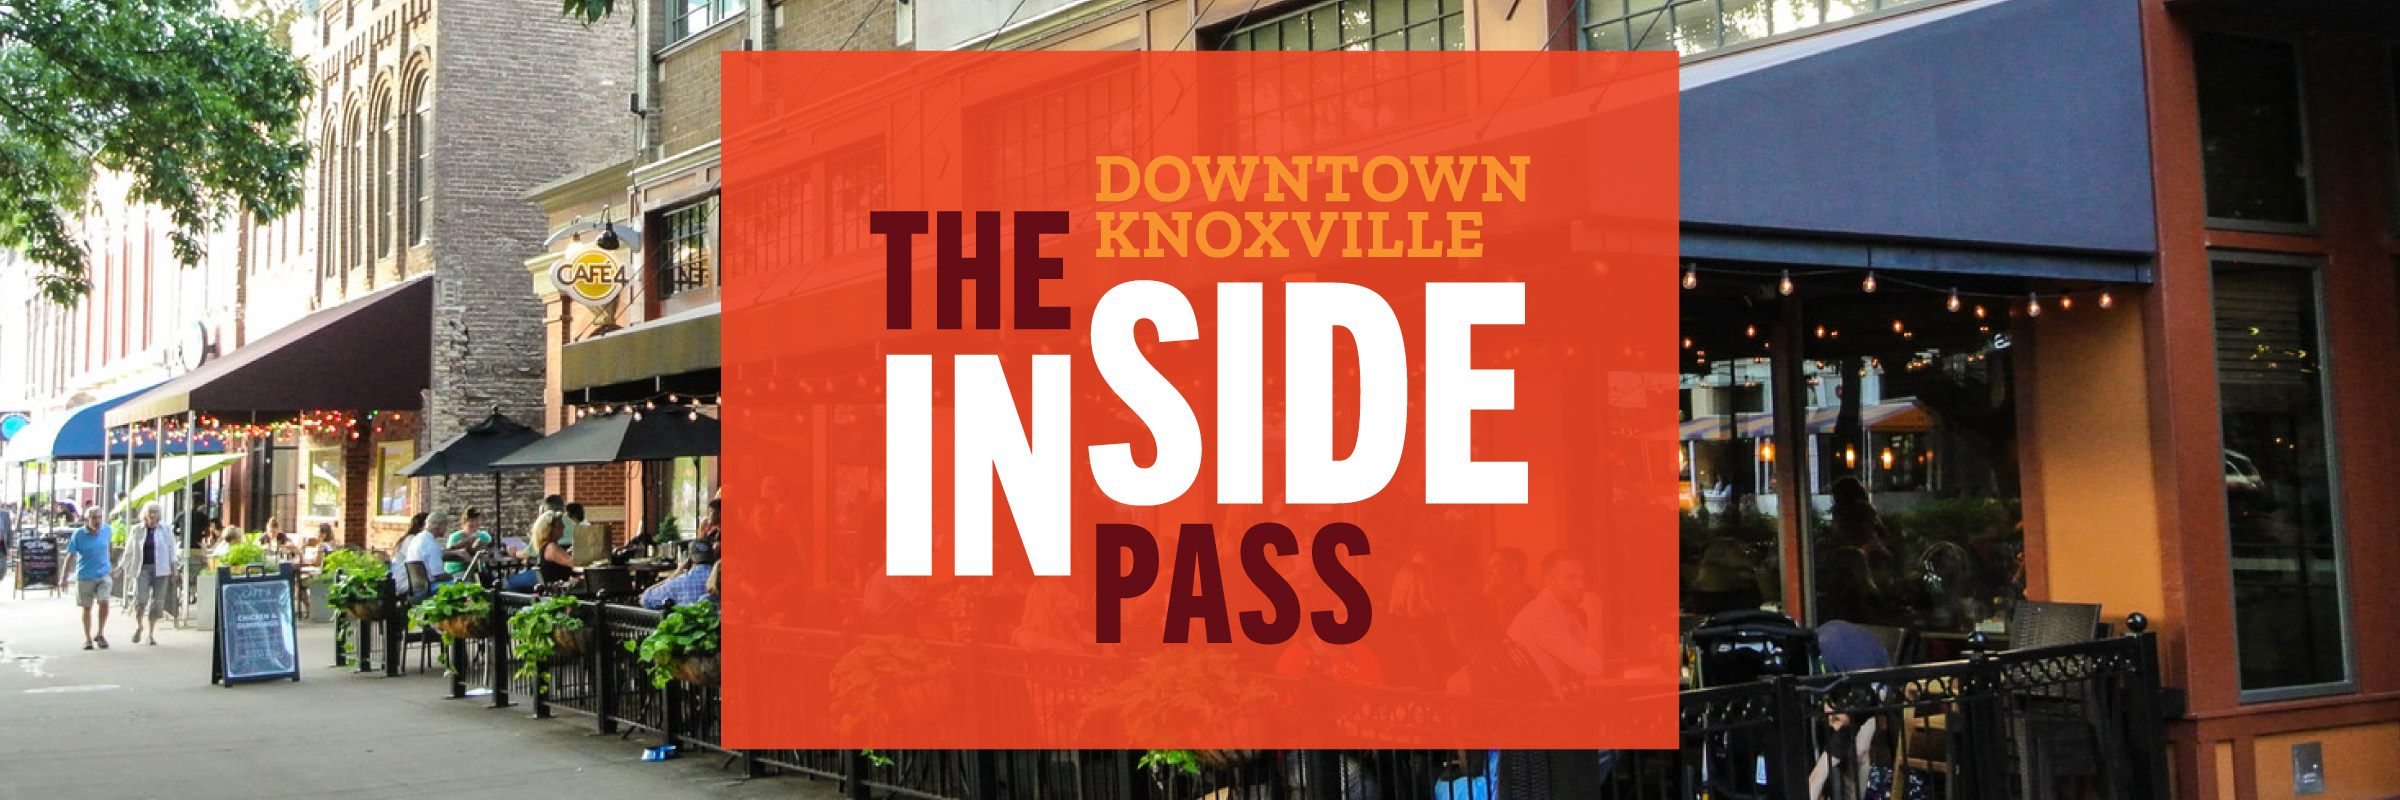 Downtown Knoxville Inside Pass Logo